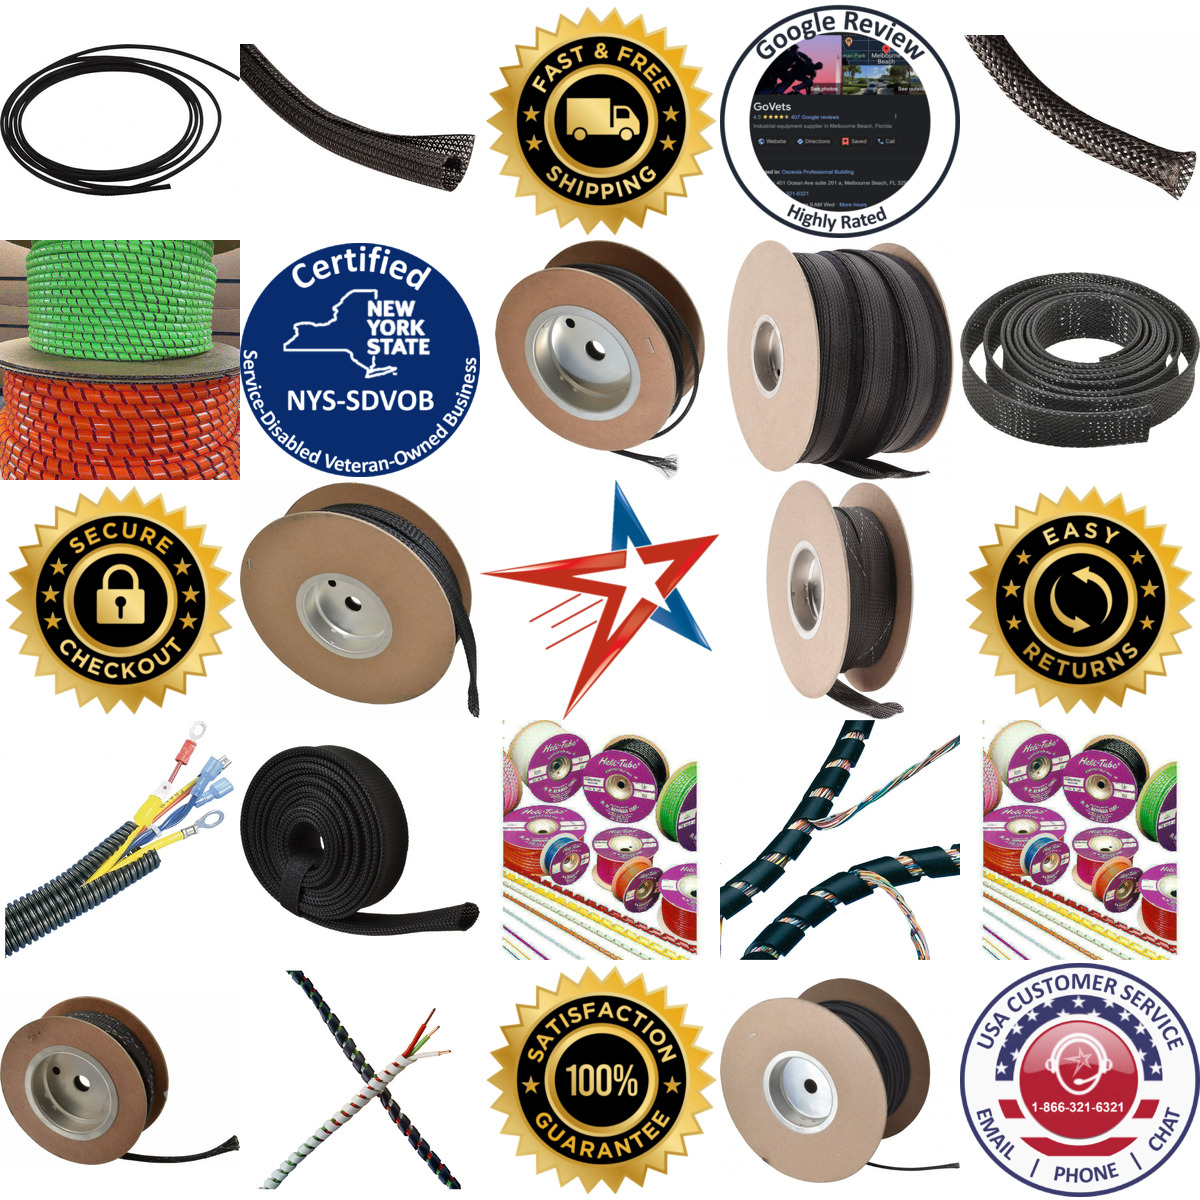 A selection of Cable Sleeves products on GoVets